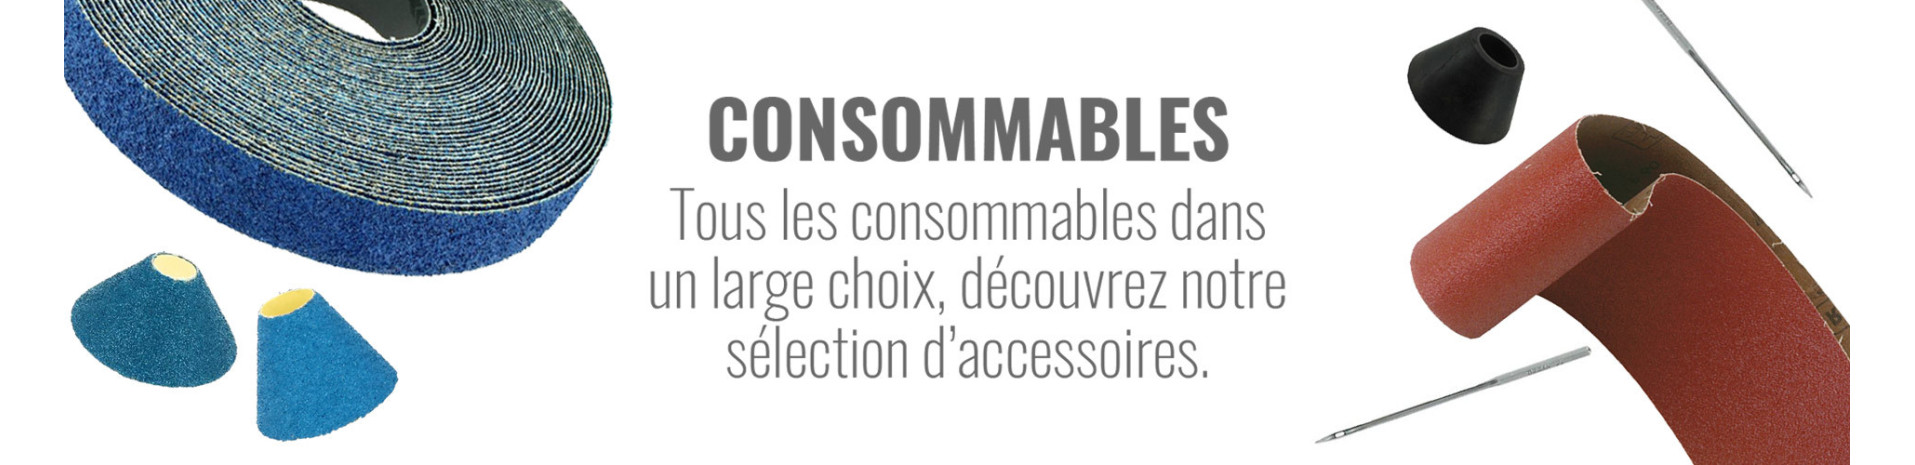 CONSOMMABLE